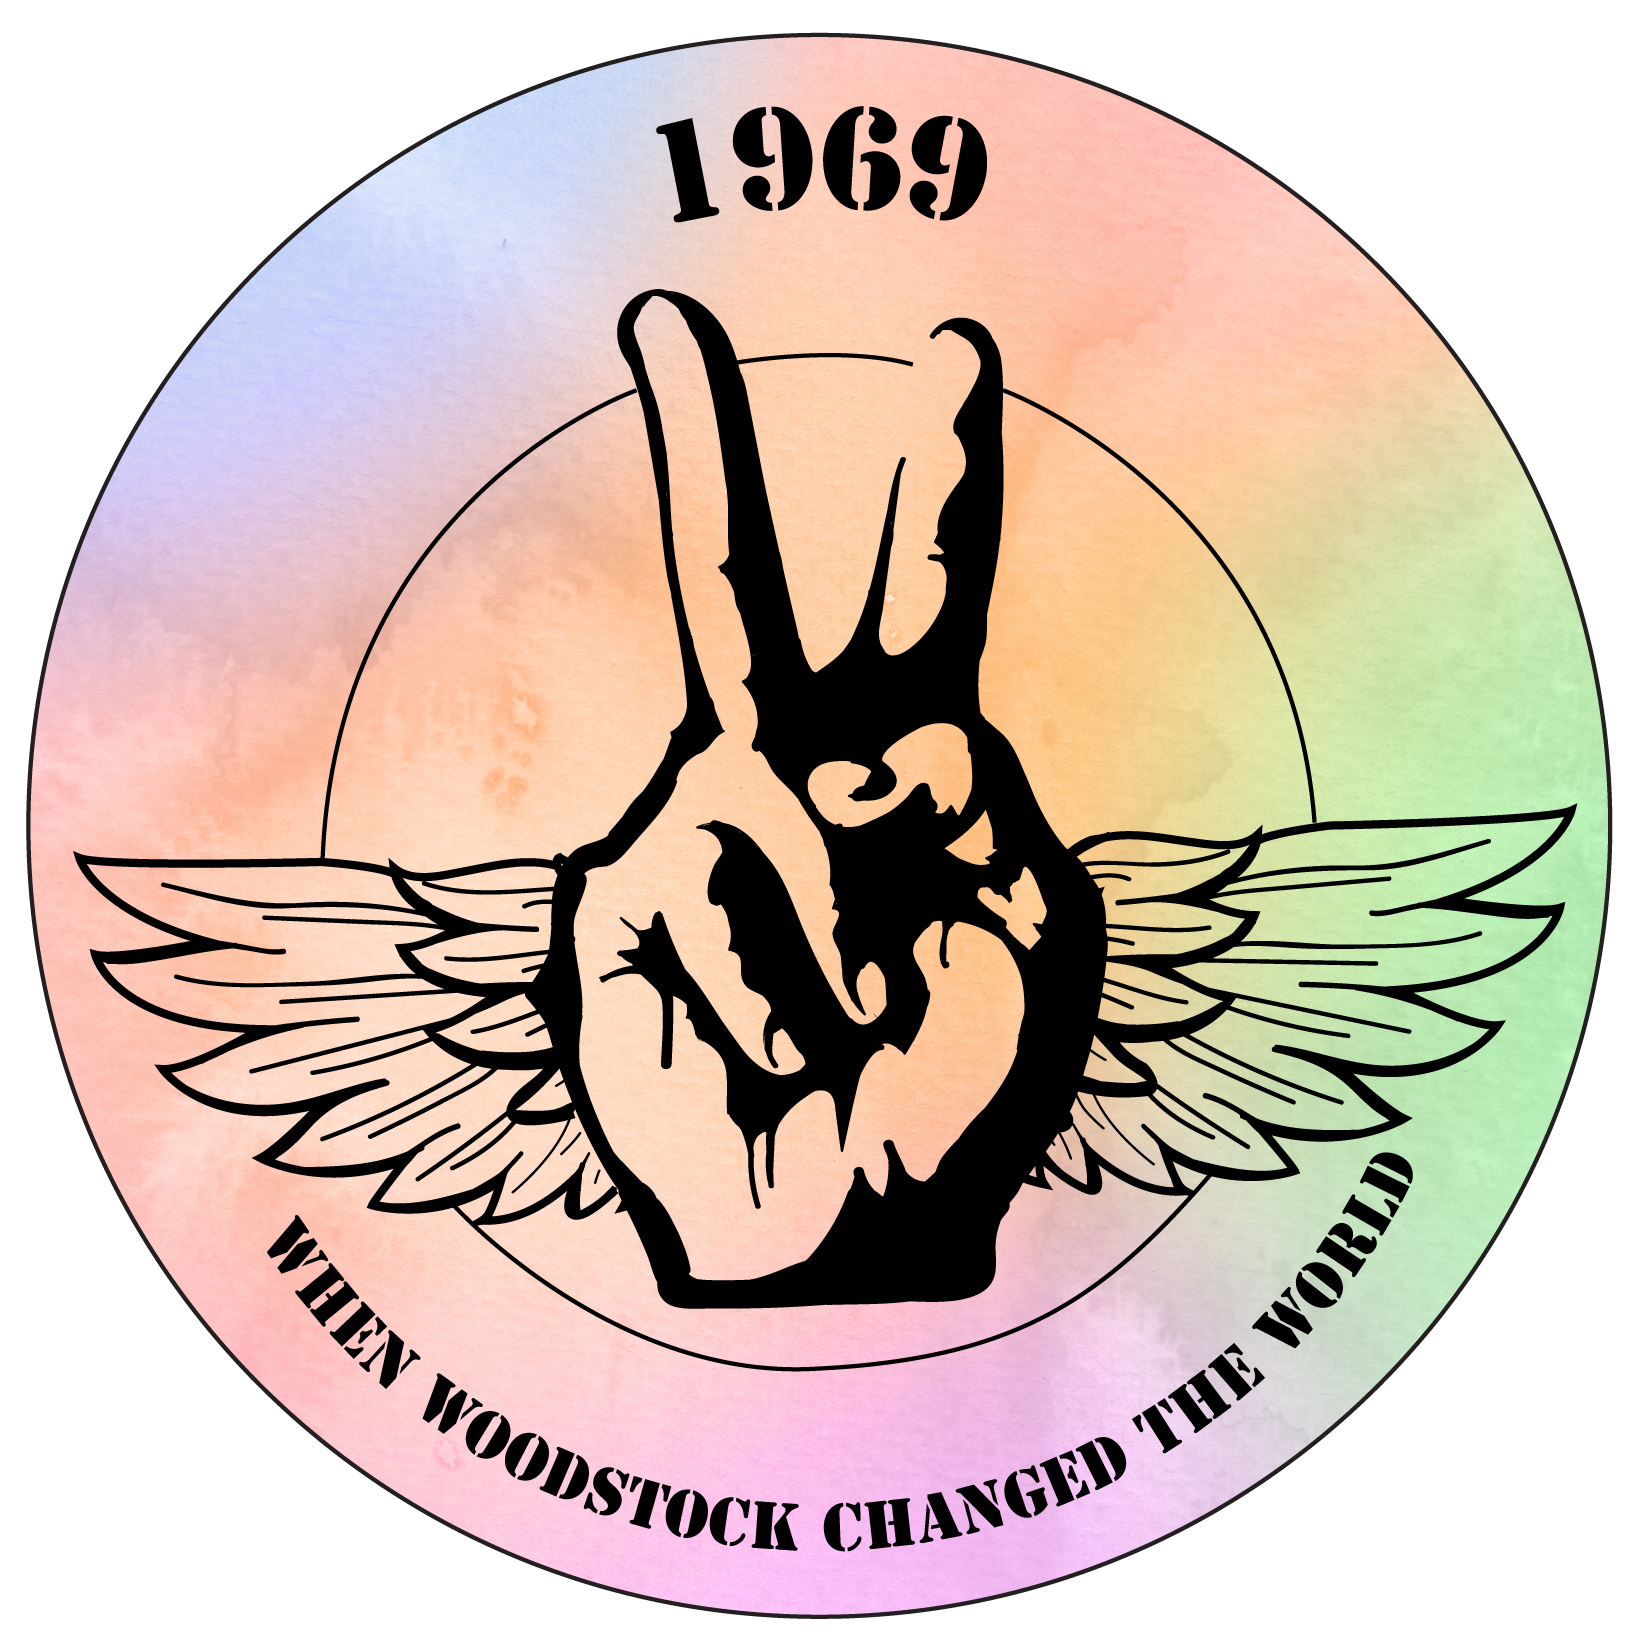 circular logo with a peace sign and wings